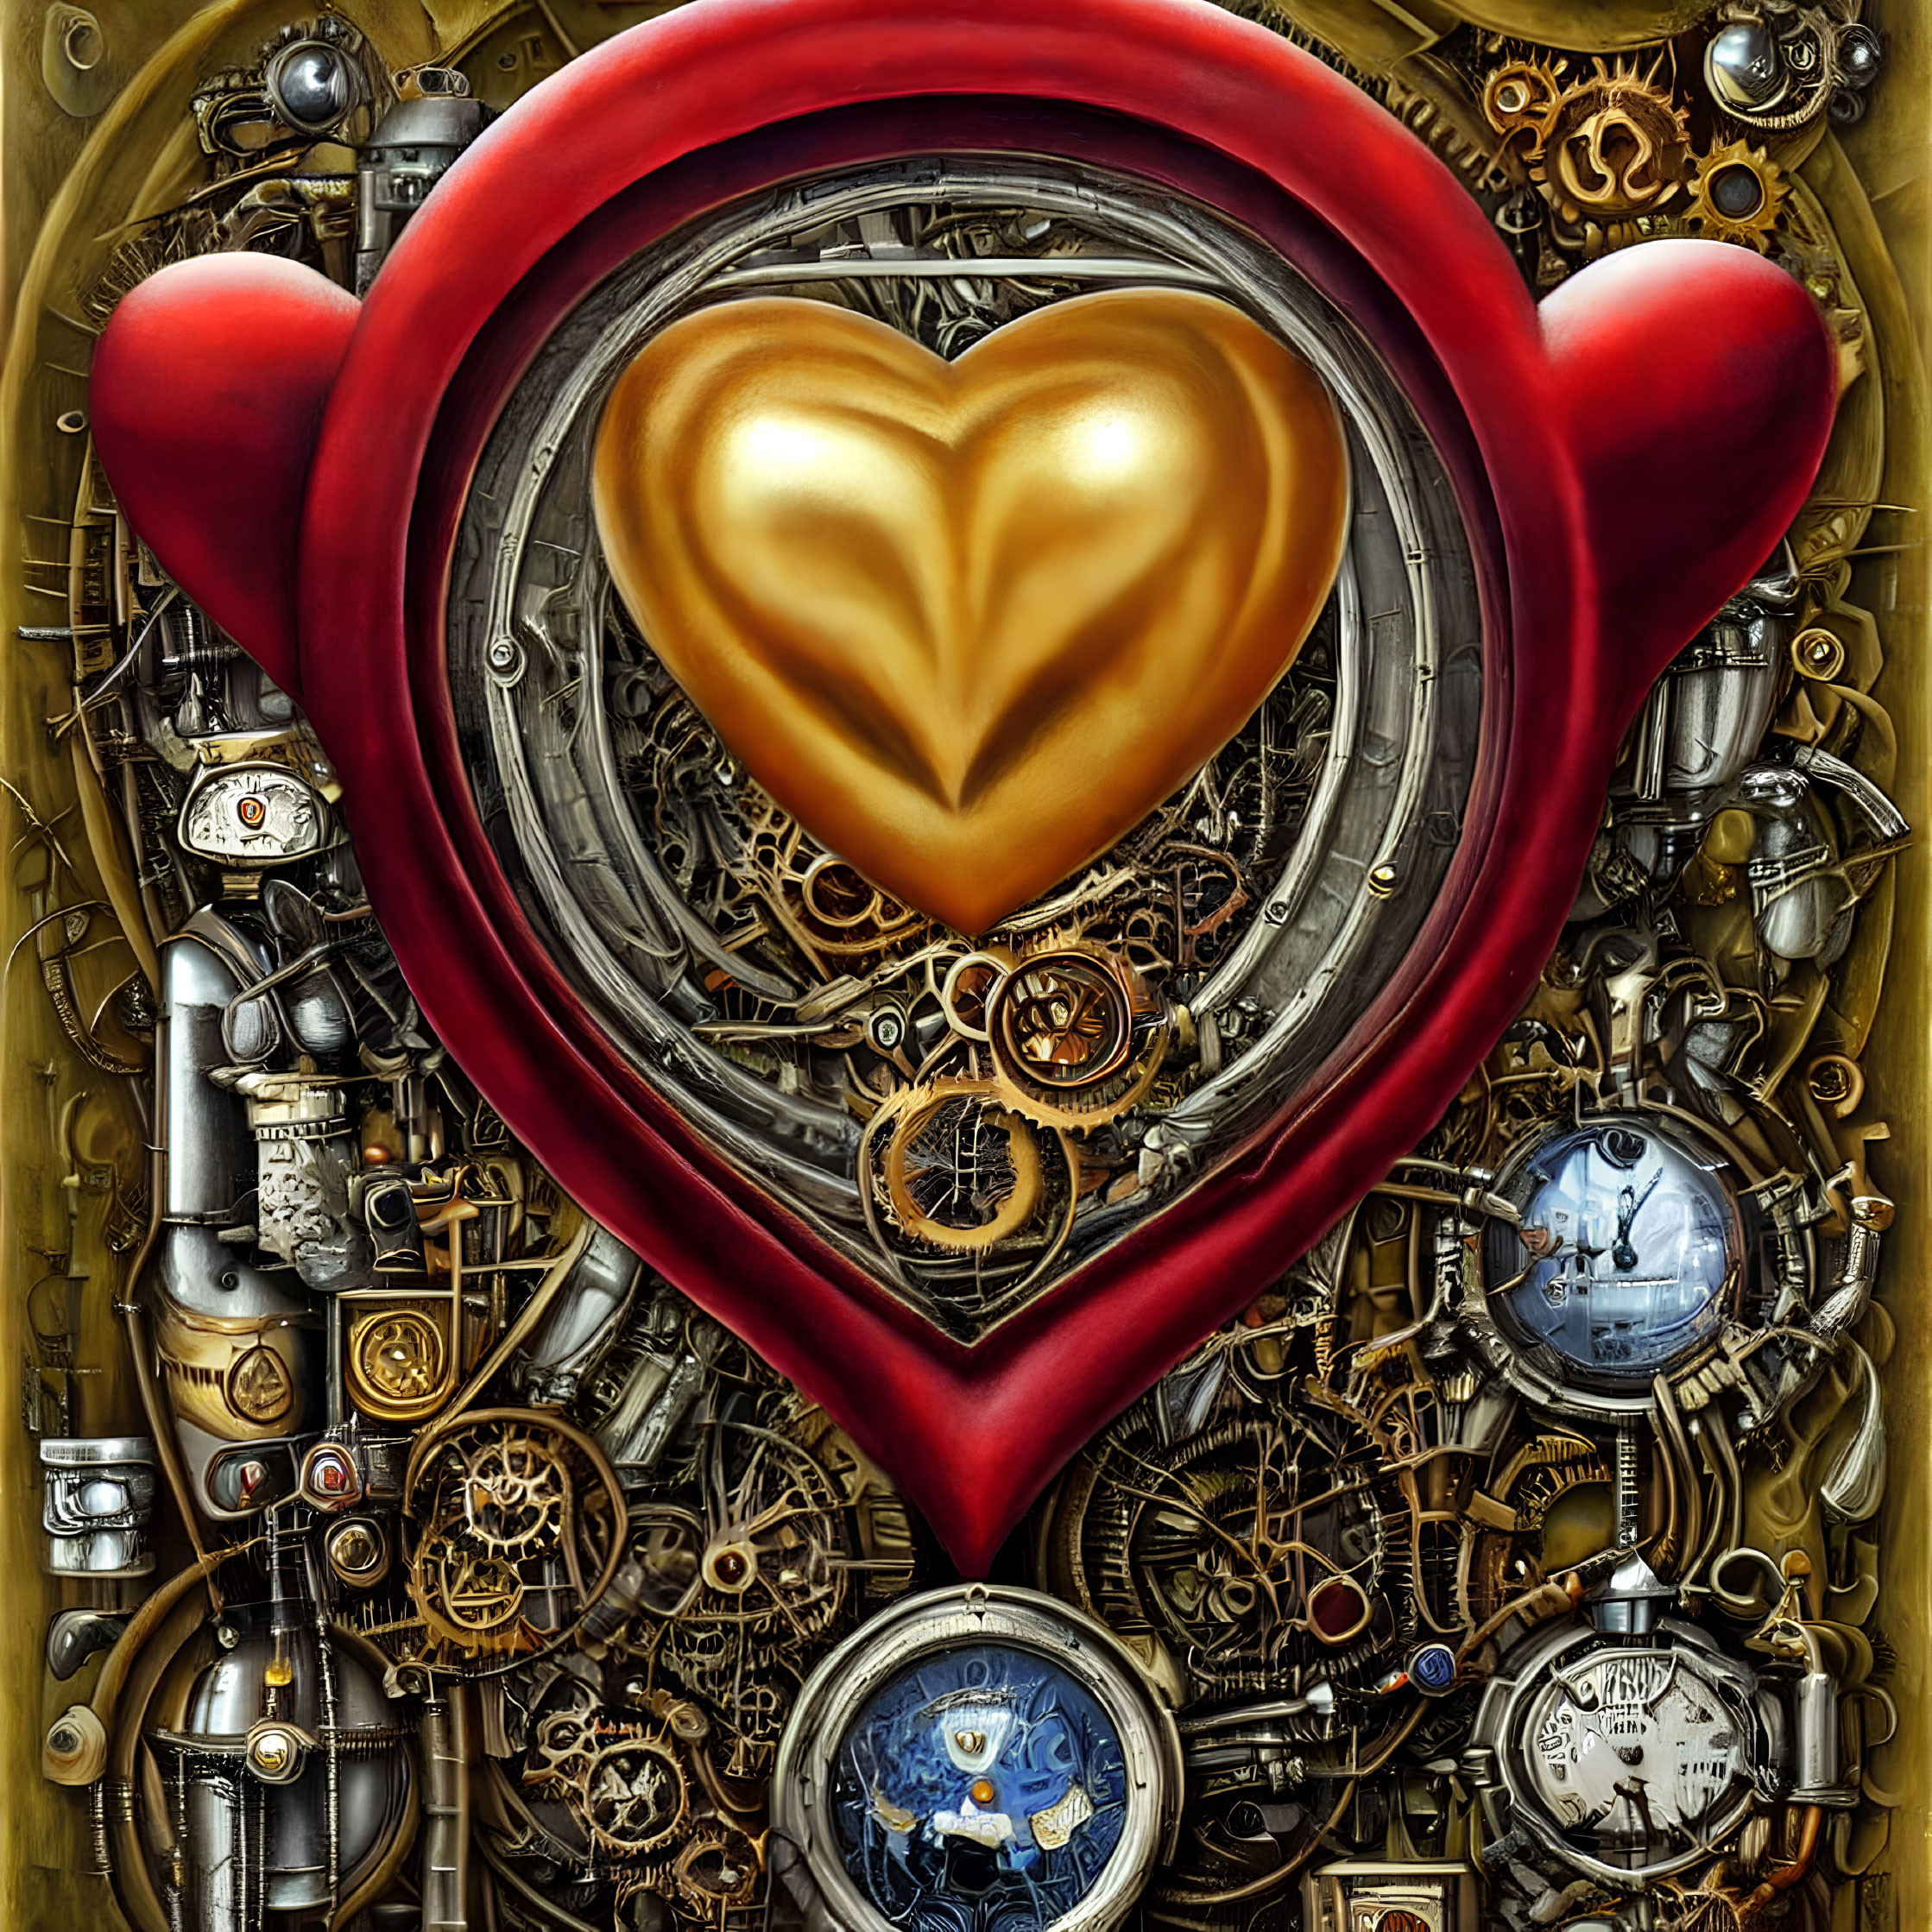 Surreal golden heart surrounded by gears and clocks on yellow background